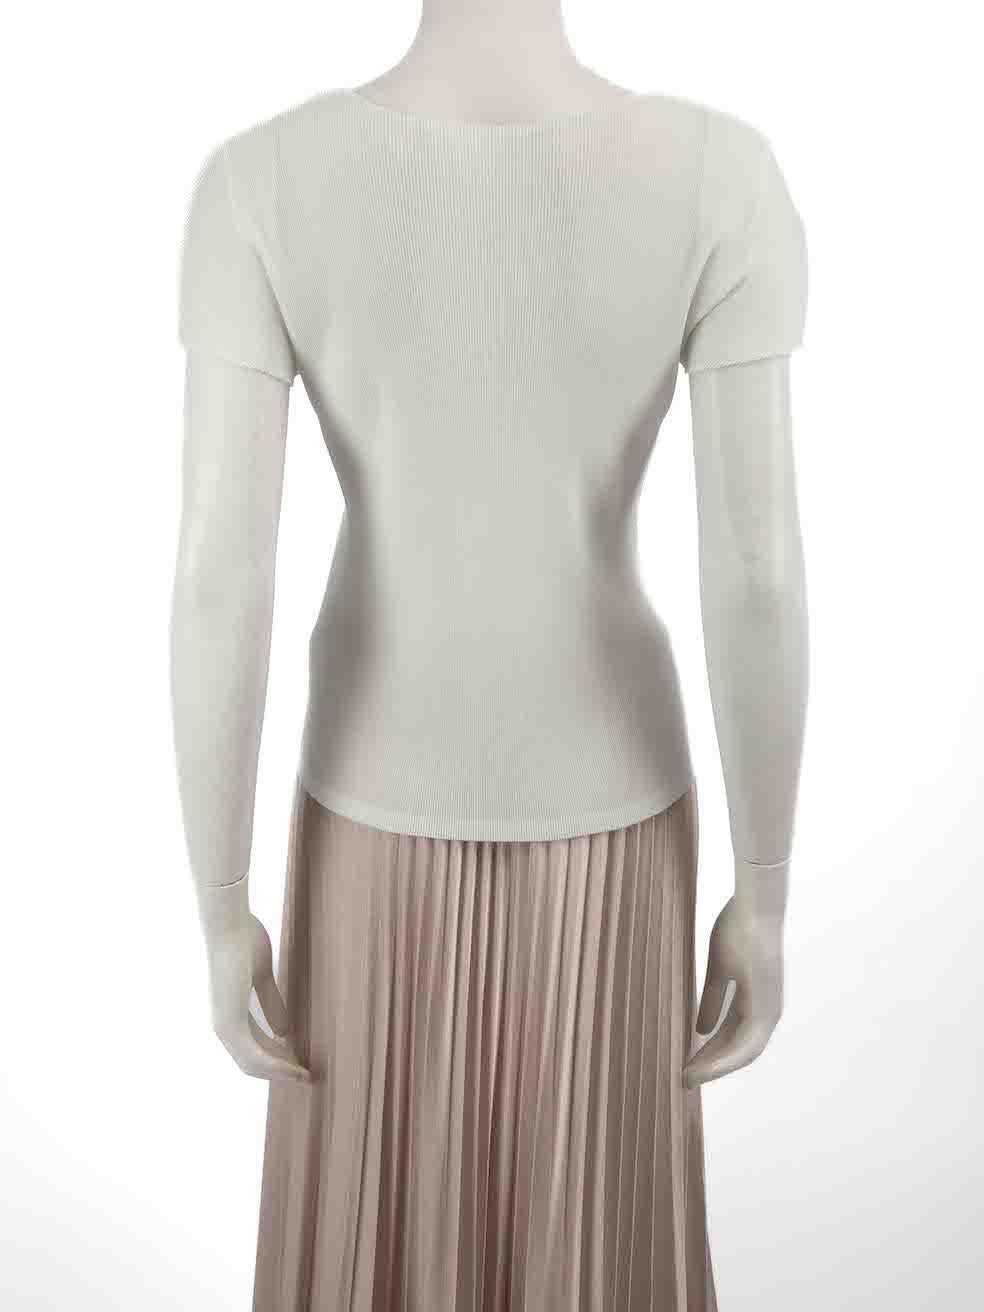 Issey Miyake Pleats Please by Issey Miyake White Round Neck Pleated Top Size M In Good Condition For Sale In London, GB